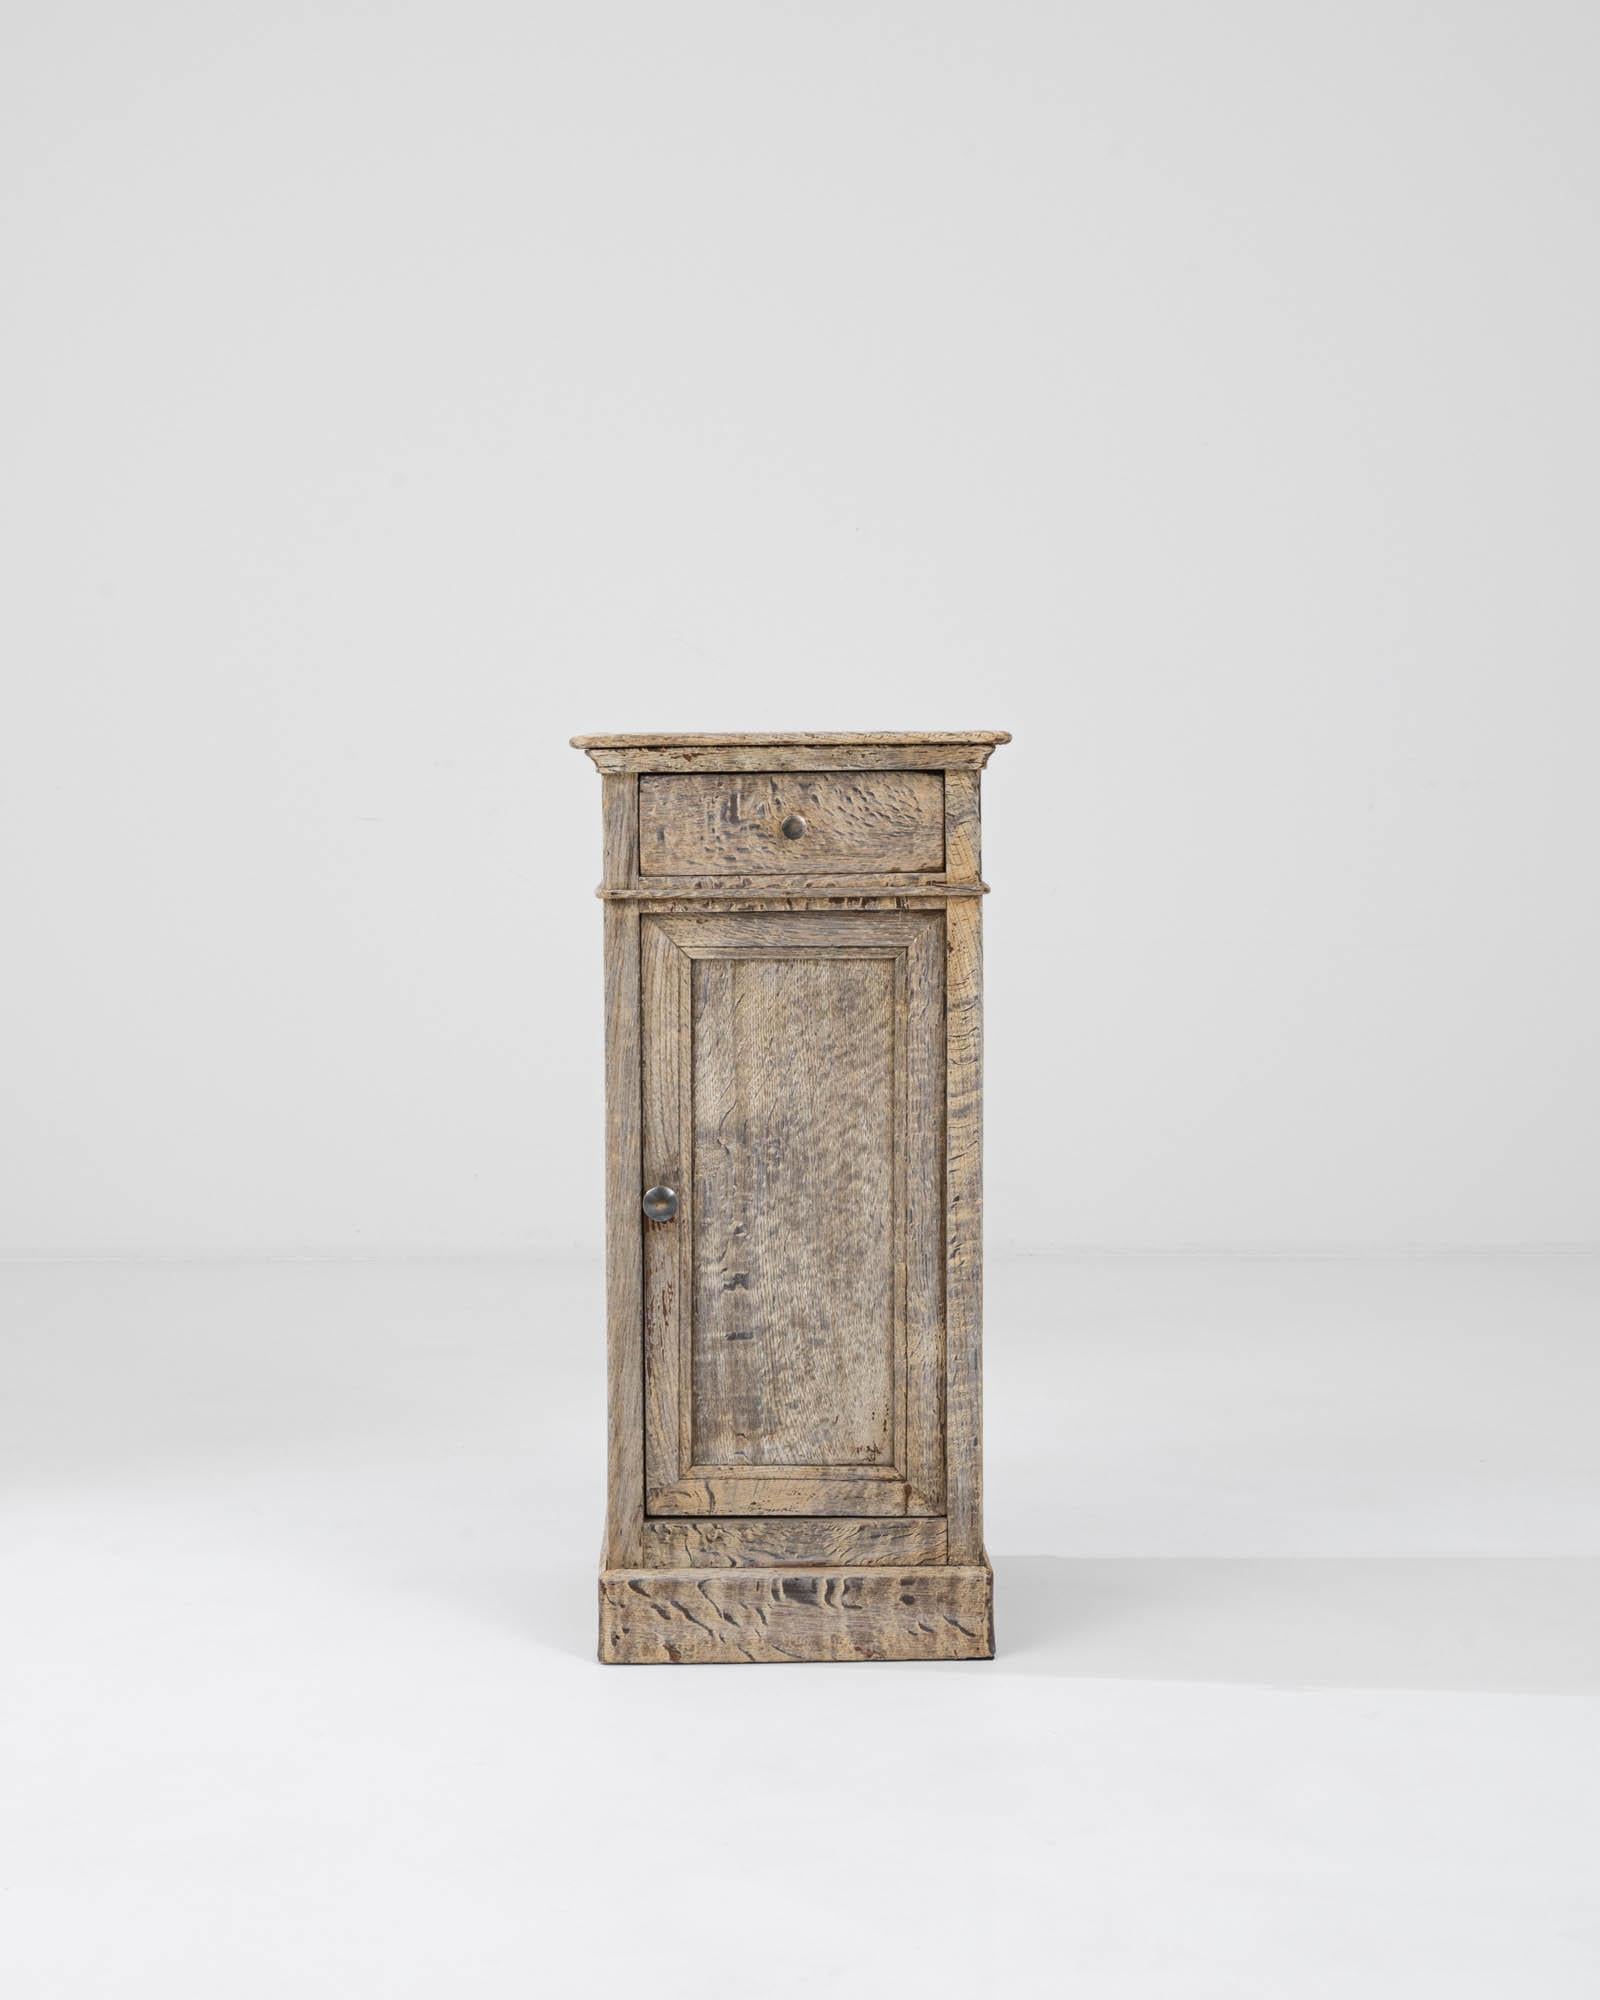 Introducing a piece of timeless elegance: our 1900s Belgian Bleached Oak Bedside Table. Crafted with meticulous attention to detail, this elongated bedside table exudes understated sophistication. Fashioned from light oak, its light finish adds a